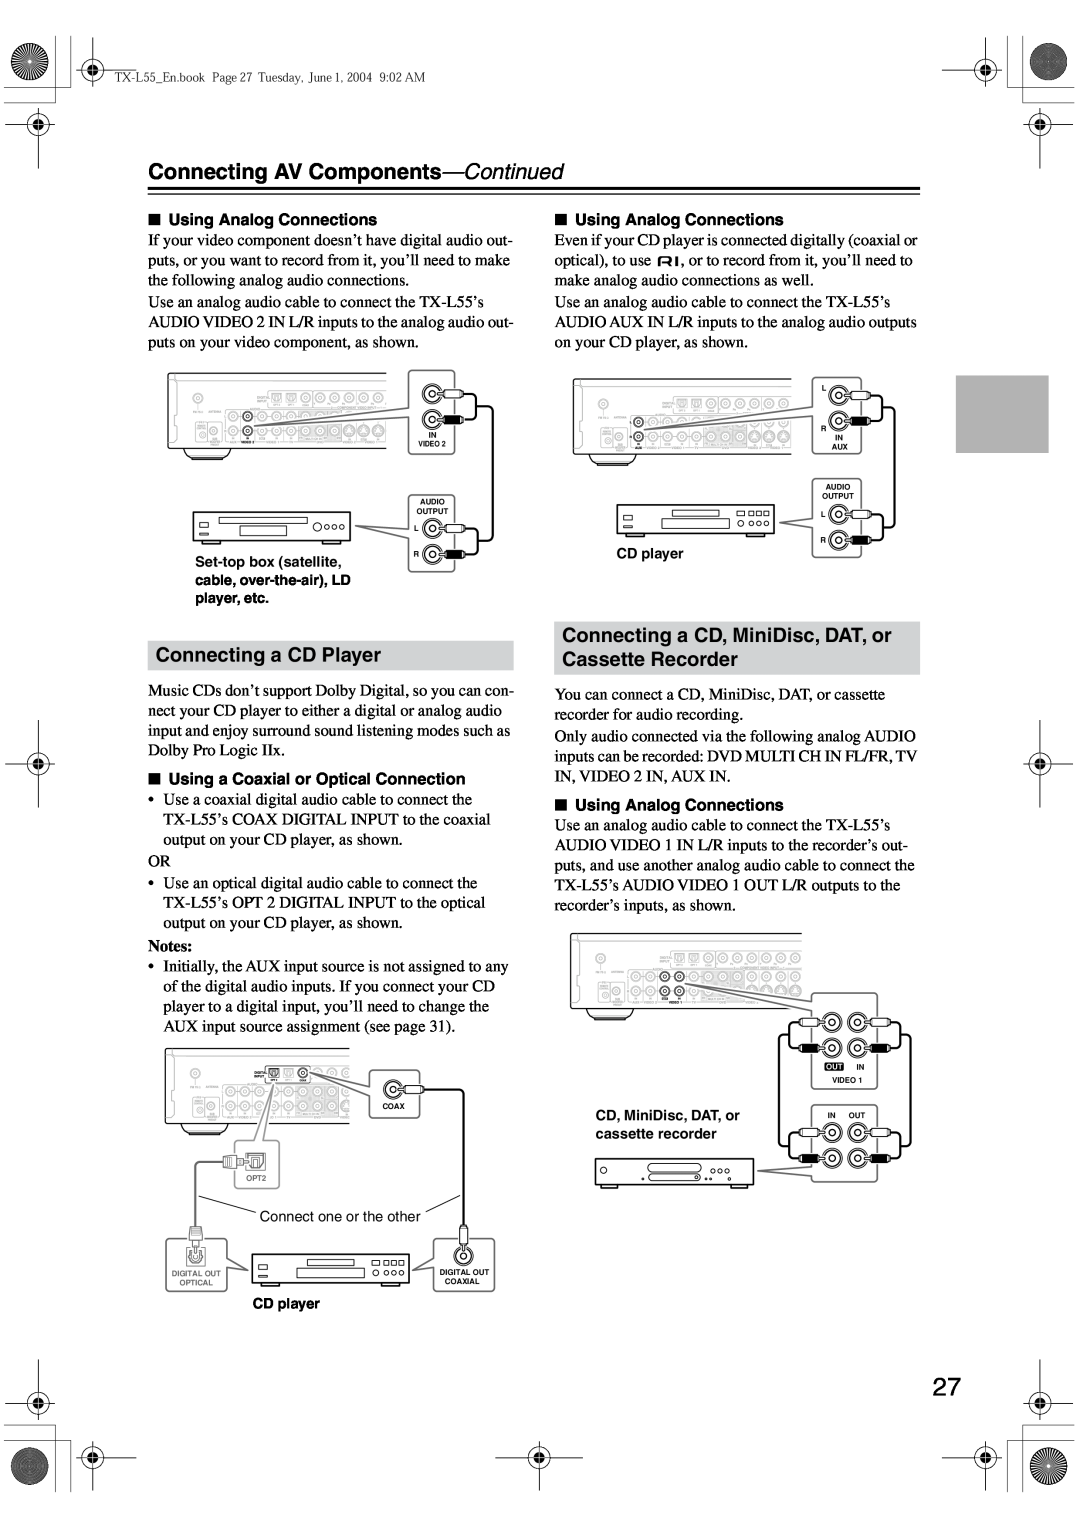 Onkyo TX-L55 instruction manual Connecting AV Components-Continued, Connecting a CD Player 